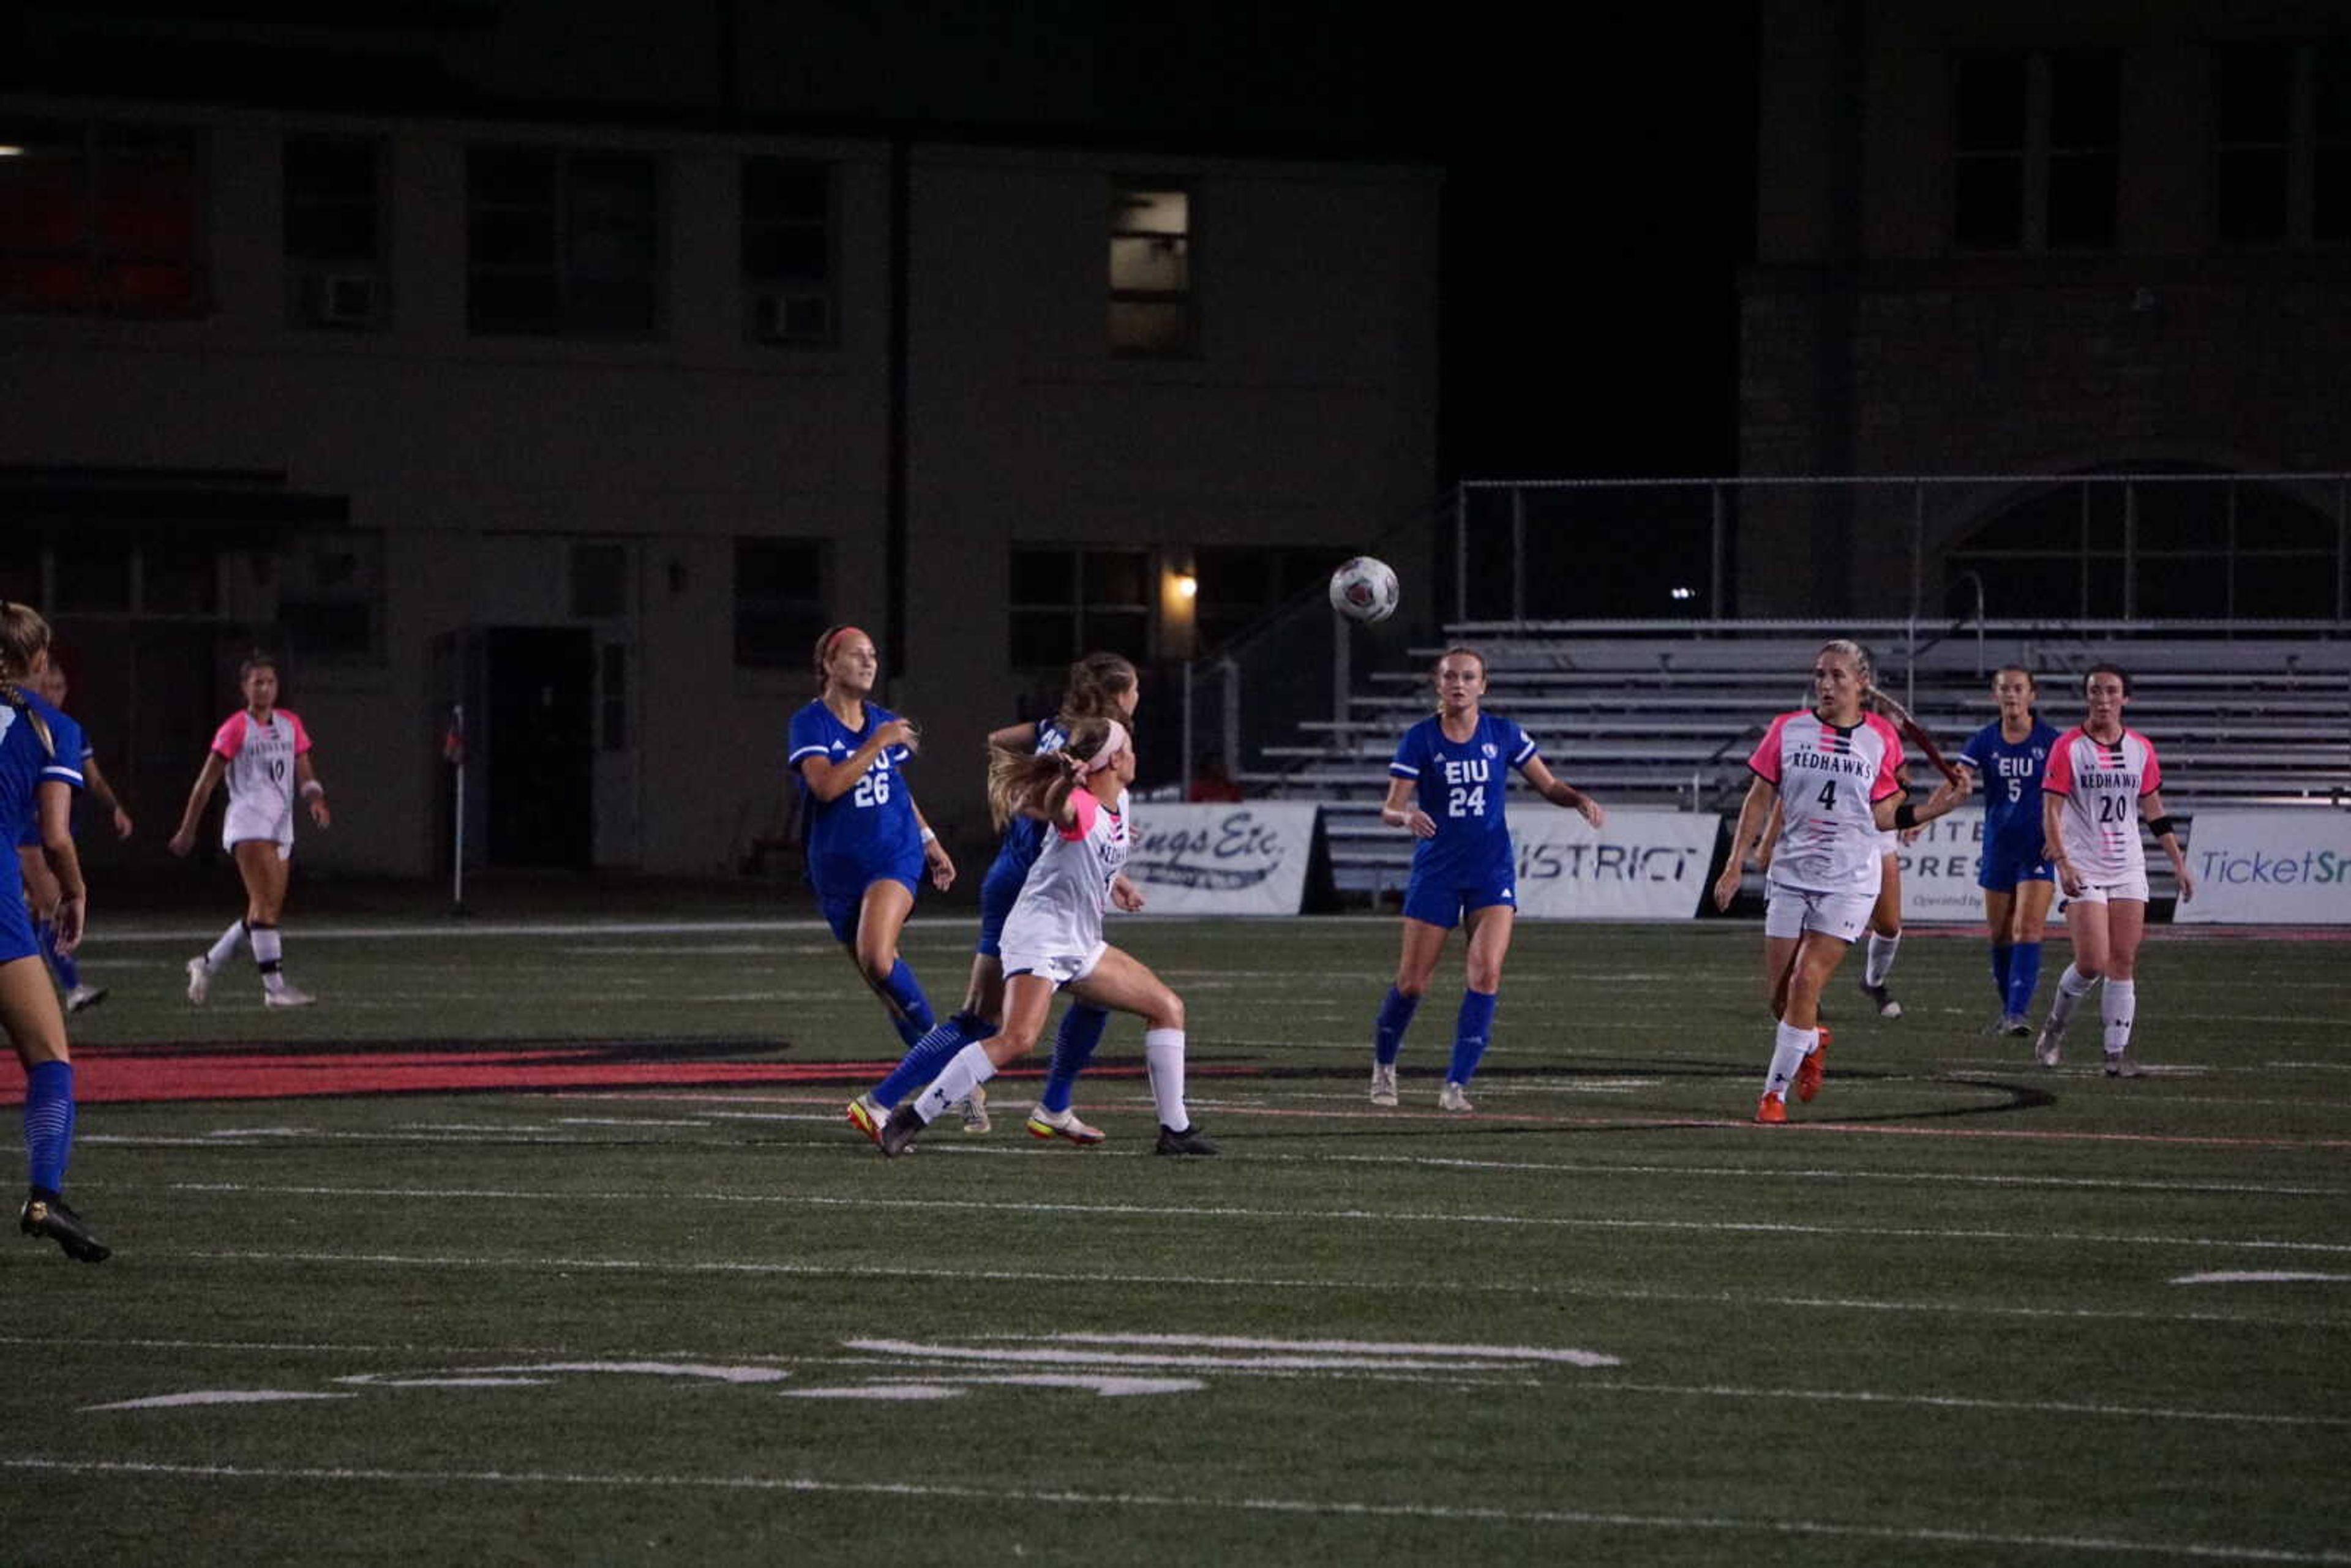 Freshman forward Katelyn Miller battles for the ball during Southeast's 1-0 win over Eastern Illinois on Oct. 14 at Houck Stadium in Cape Girardeau.